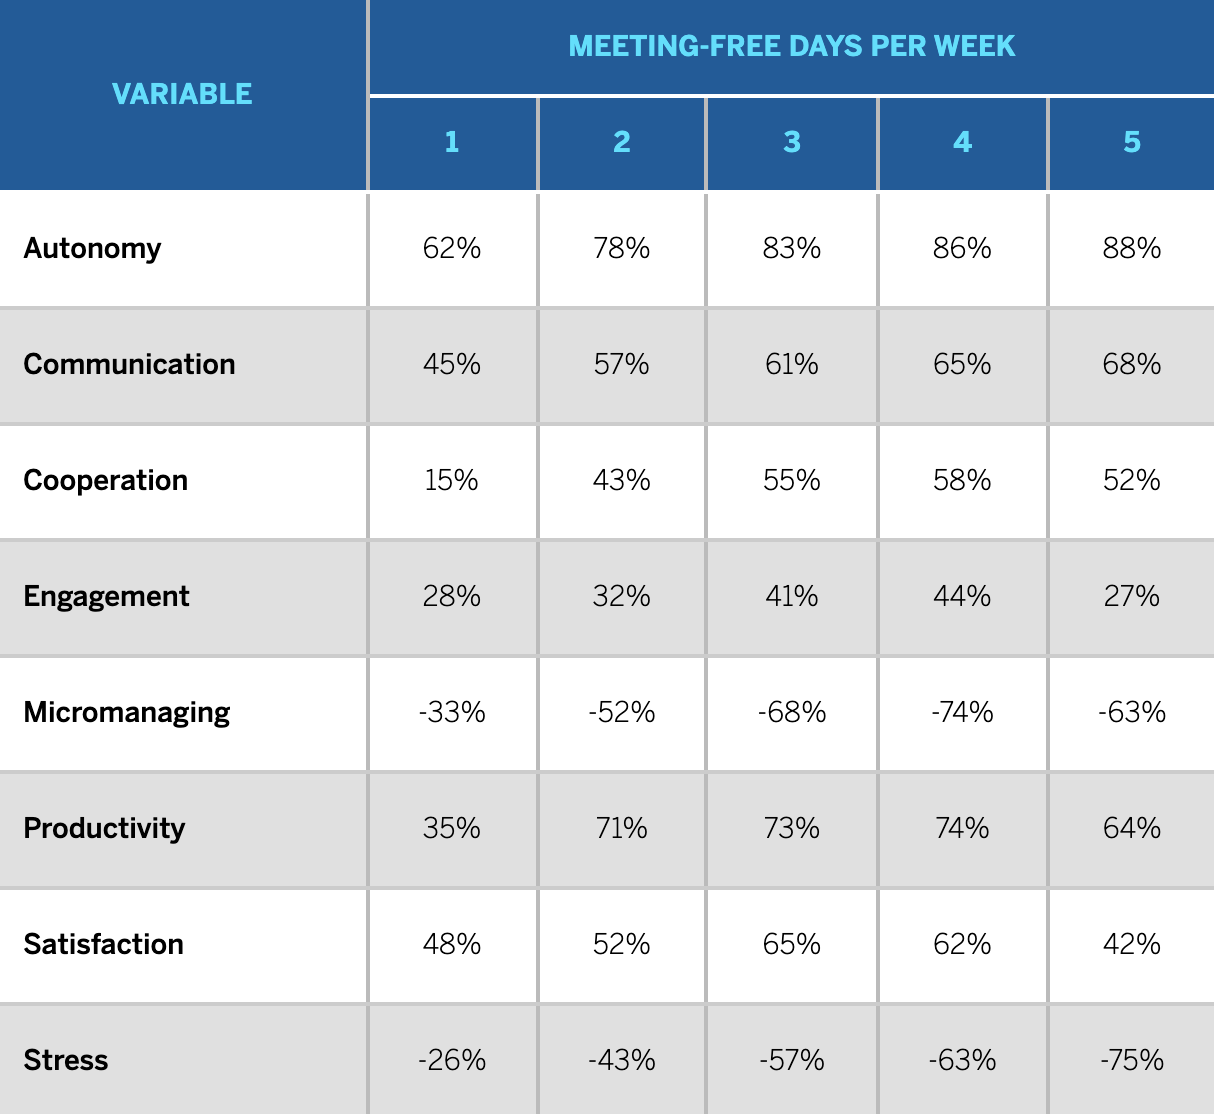 Percentage Change in Employee Ratings After Introduction of Meeting-Free Days